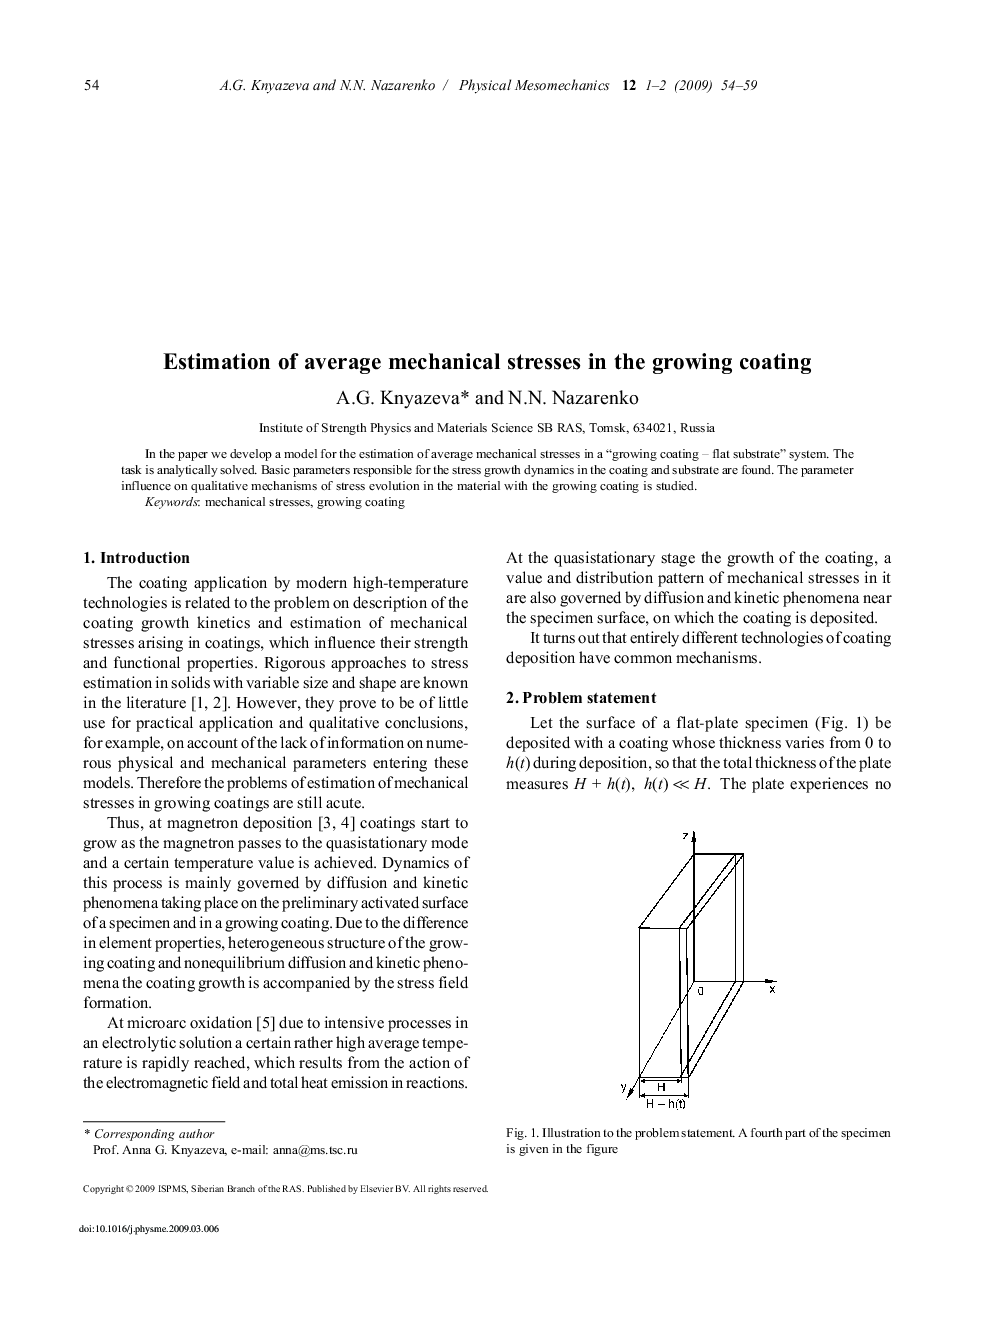 Estimation of average mechanical stresses in the growing coating